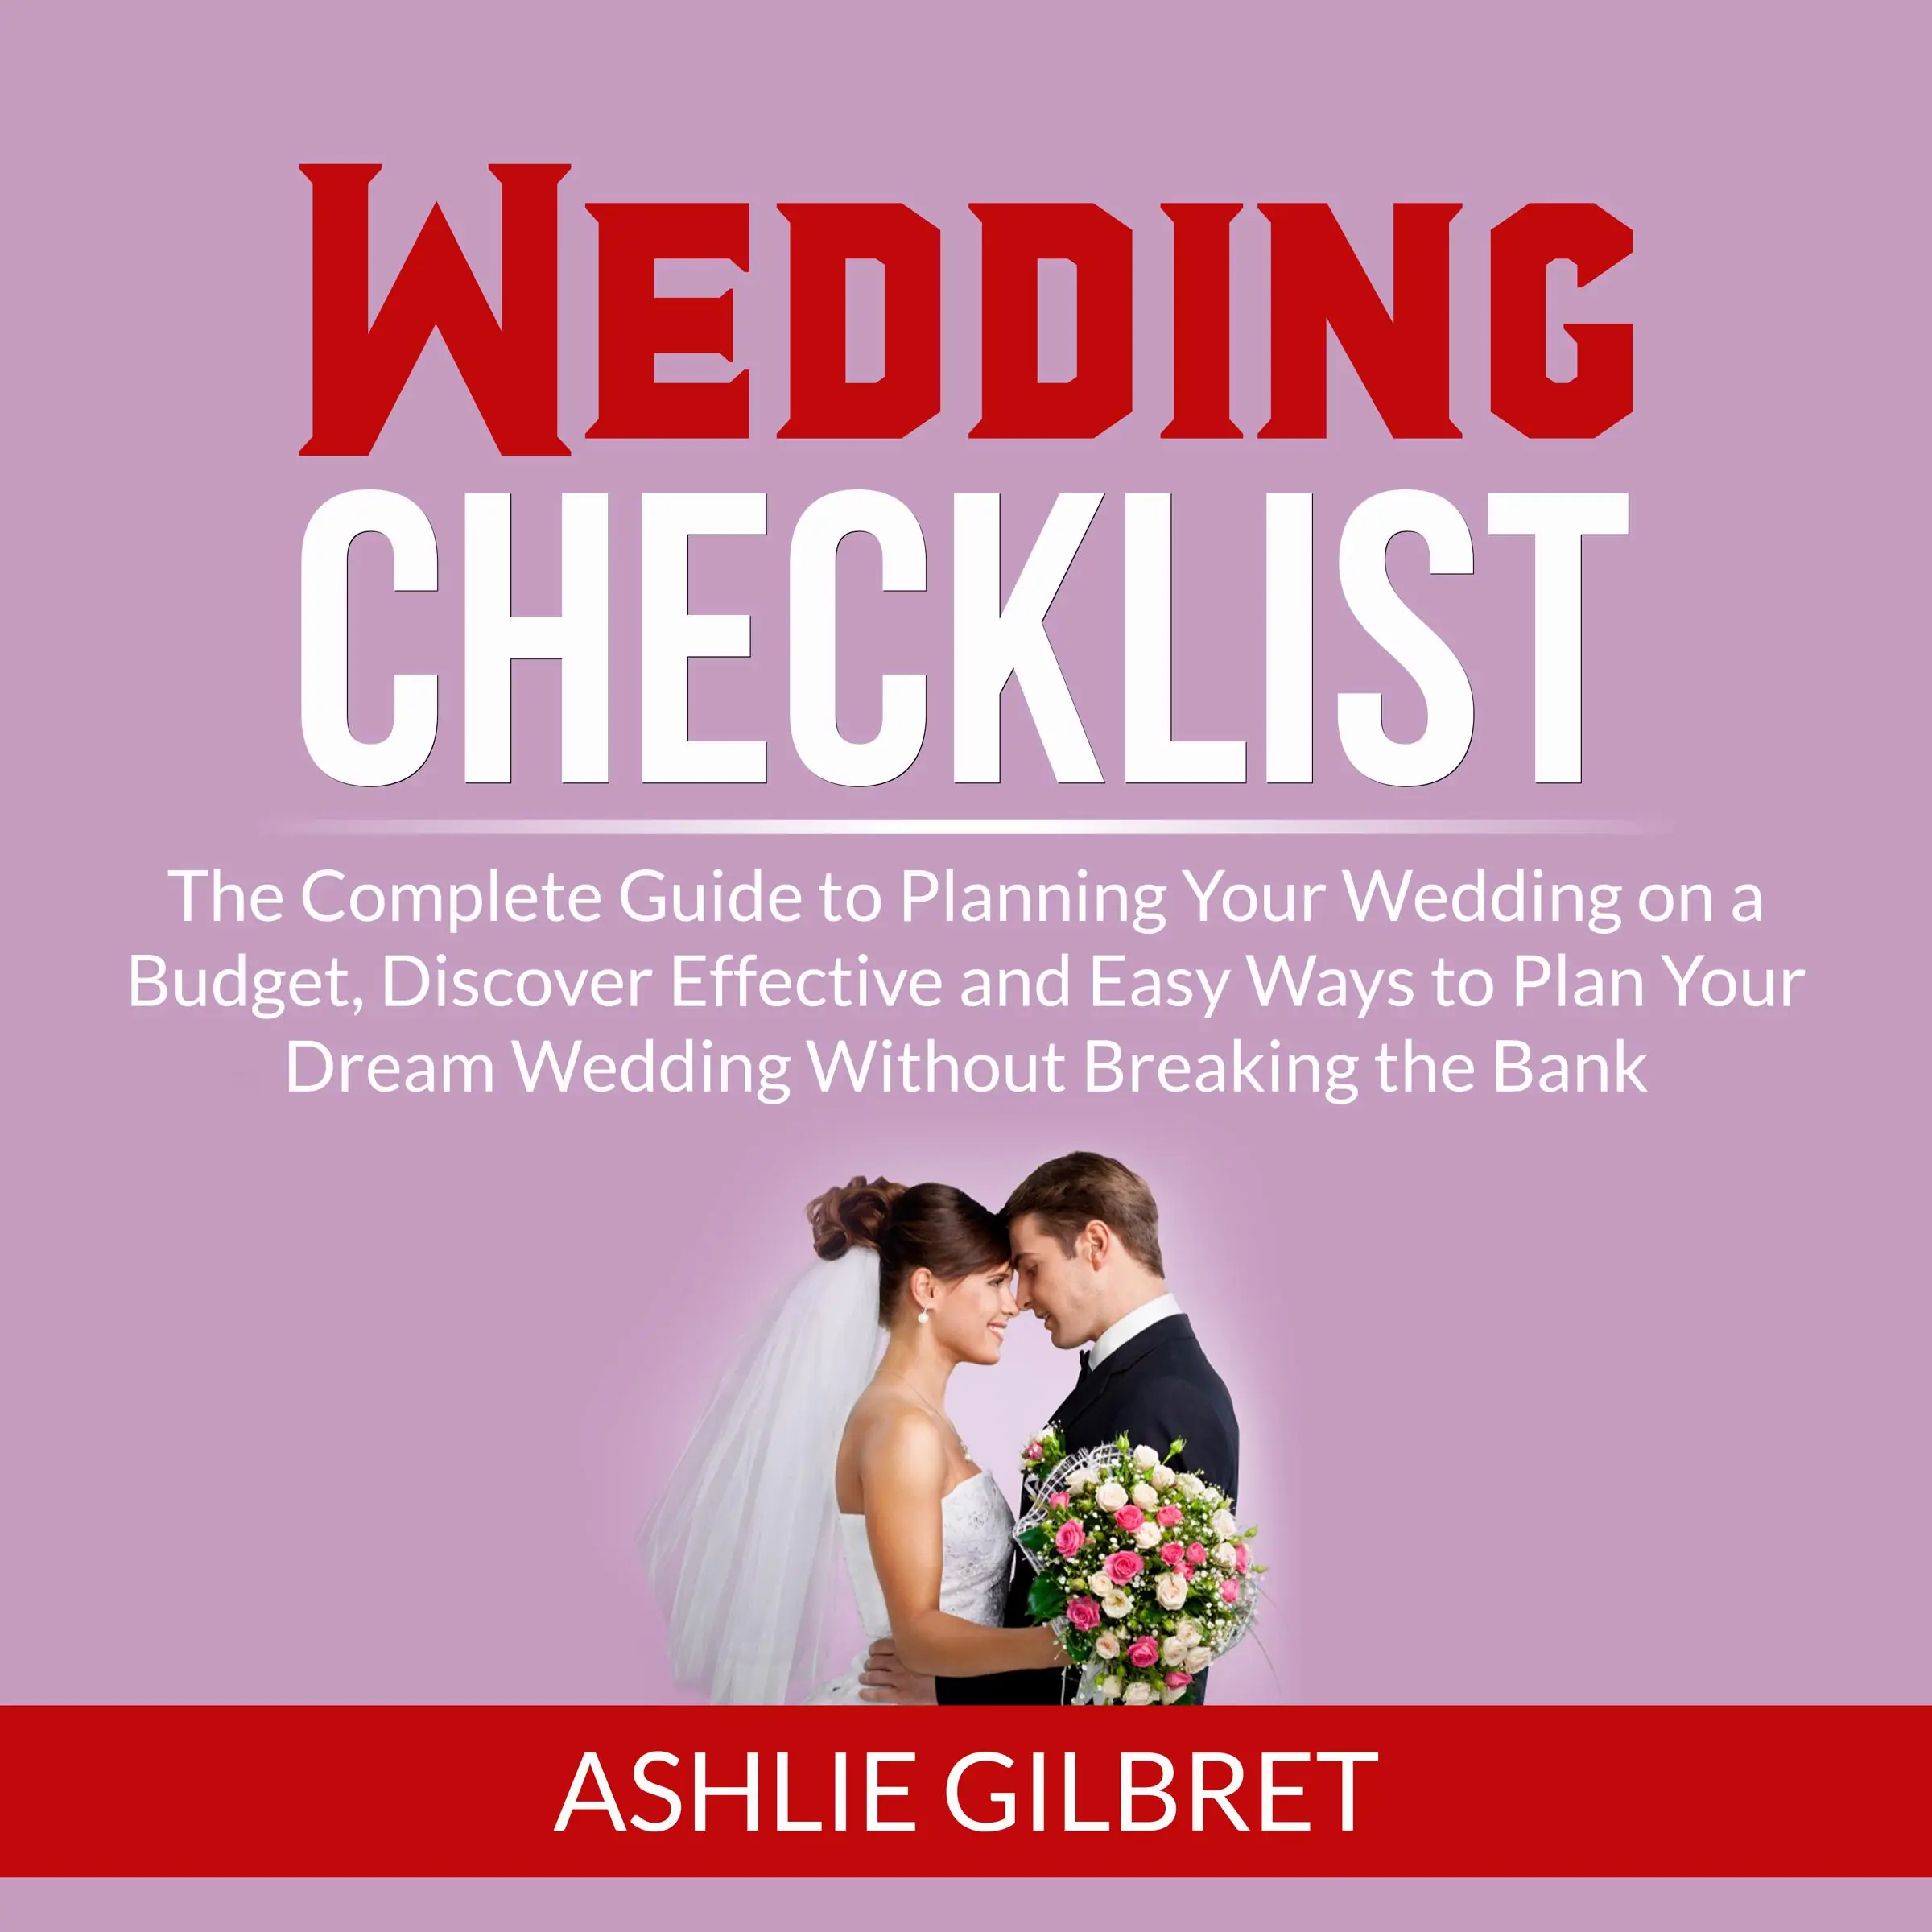 Wedding Checklist: The Complete Guide to Planning Your Wedding on a Budget, Discover Effective and Easy Ways to Plan Your Dream Wedding Without Breaking the Bank by Ashlie Gilbret Audiobook